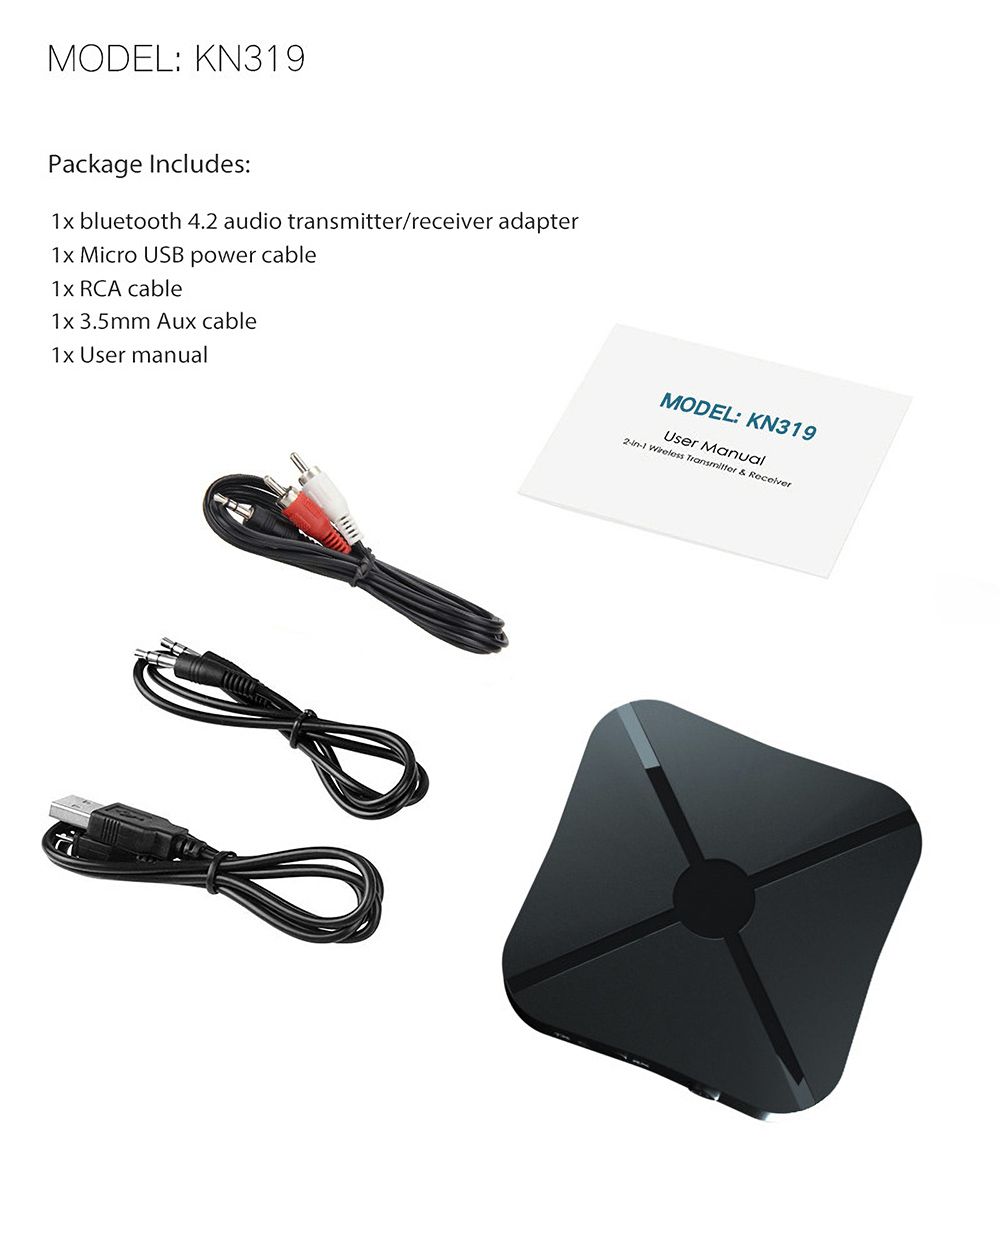 Vehicle-bluetooth-Adapter-2-in-1-bluetooth-42-Audio-Transmitter-Receiver-Adapter-USB-for-TV-Computer-1761330